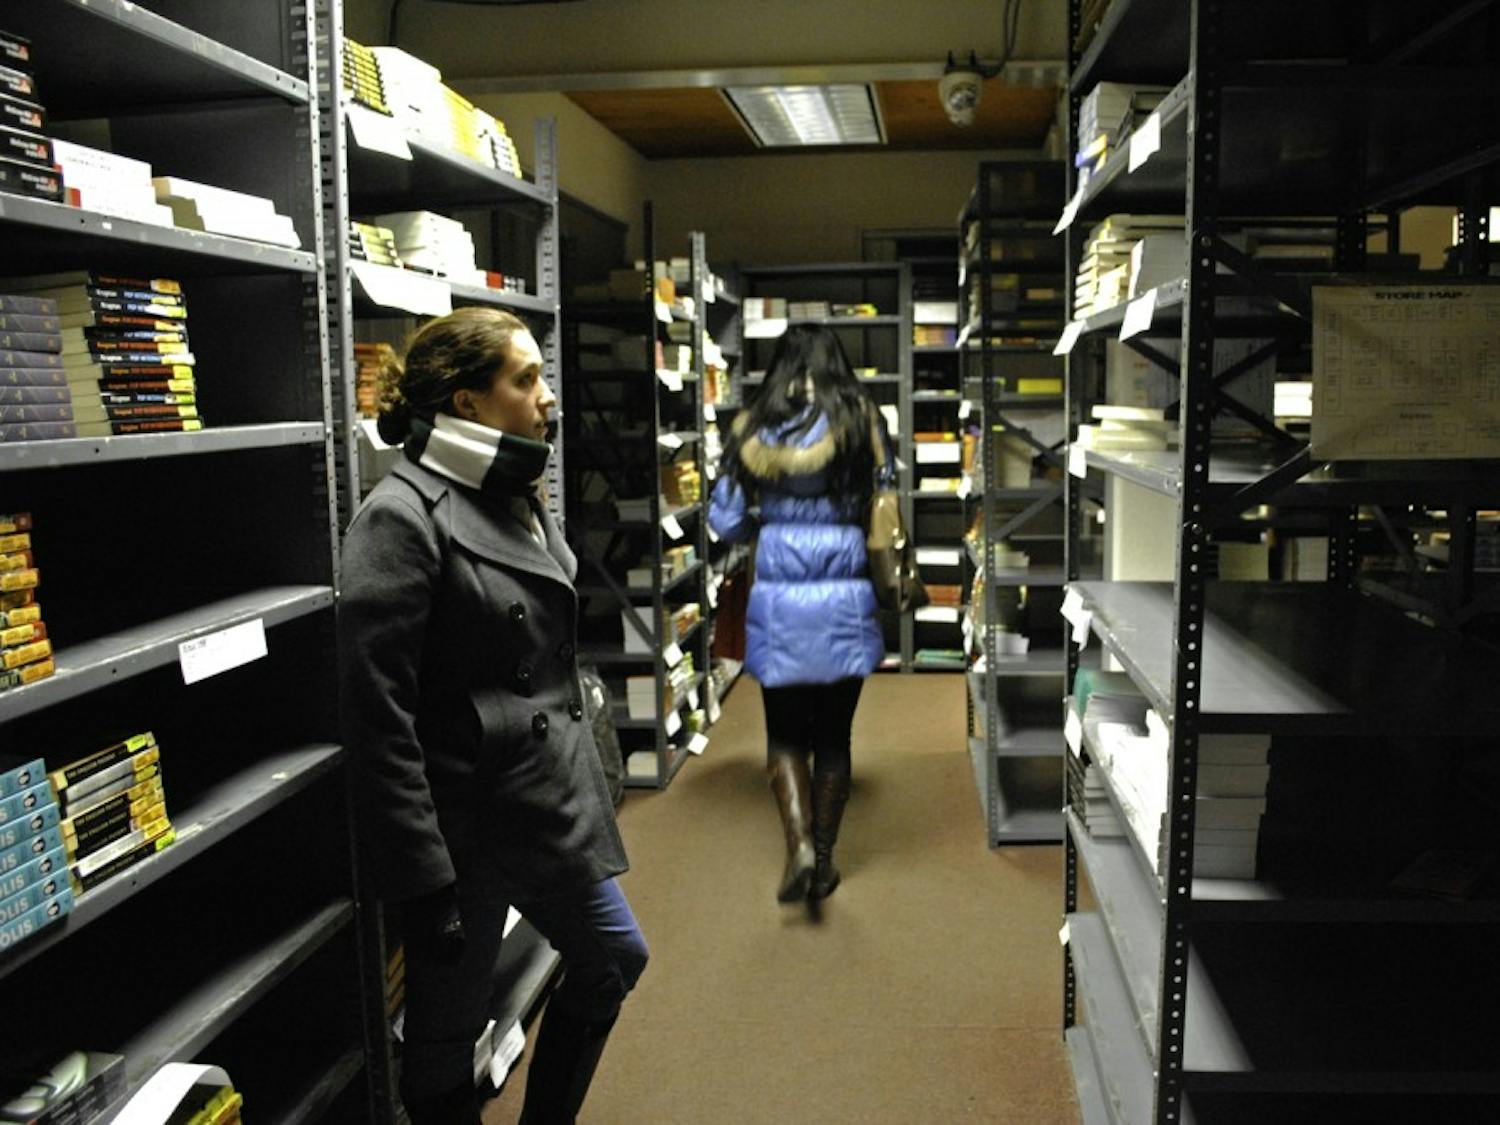 While many students purchase textbooks at Wheelock Books, others look to online retailers or student textbook exchanges. 